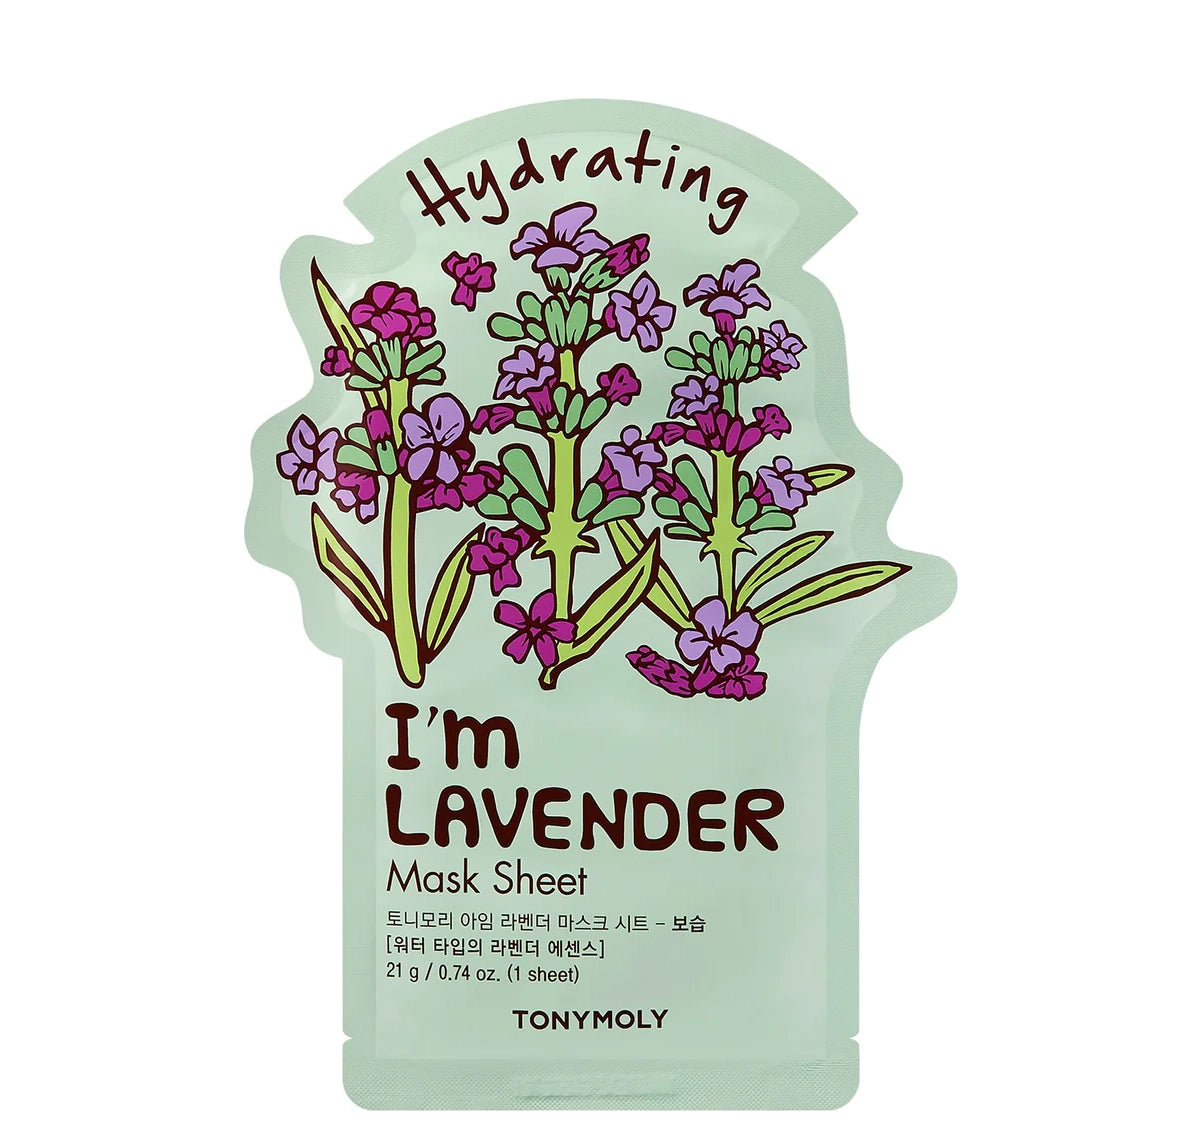 Mint Green packaging with image of lavender plant in the middle.  